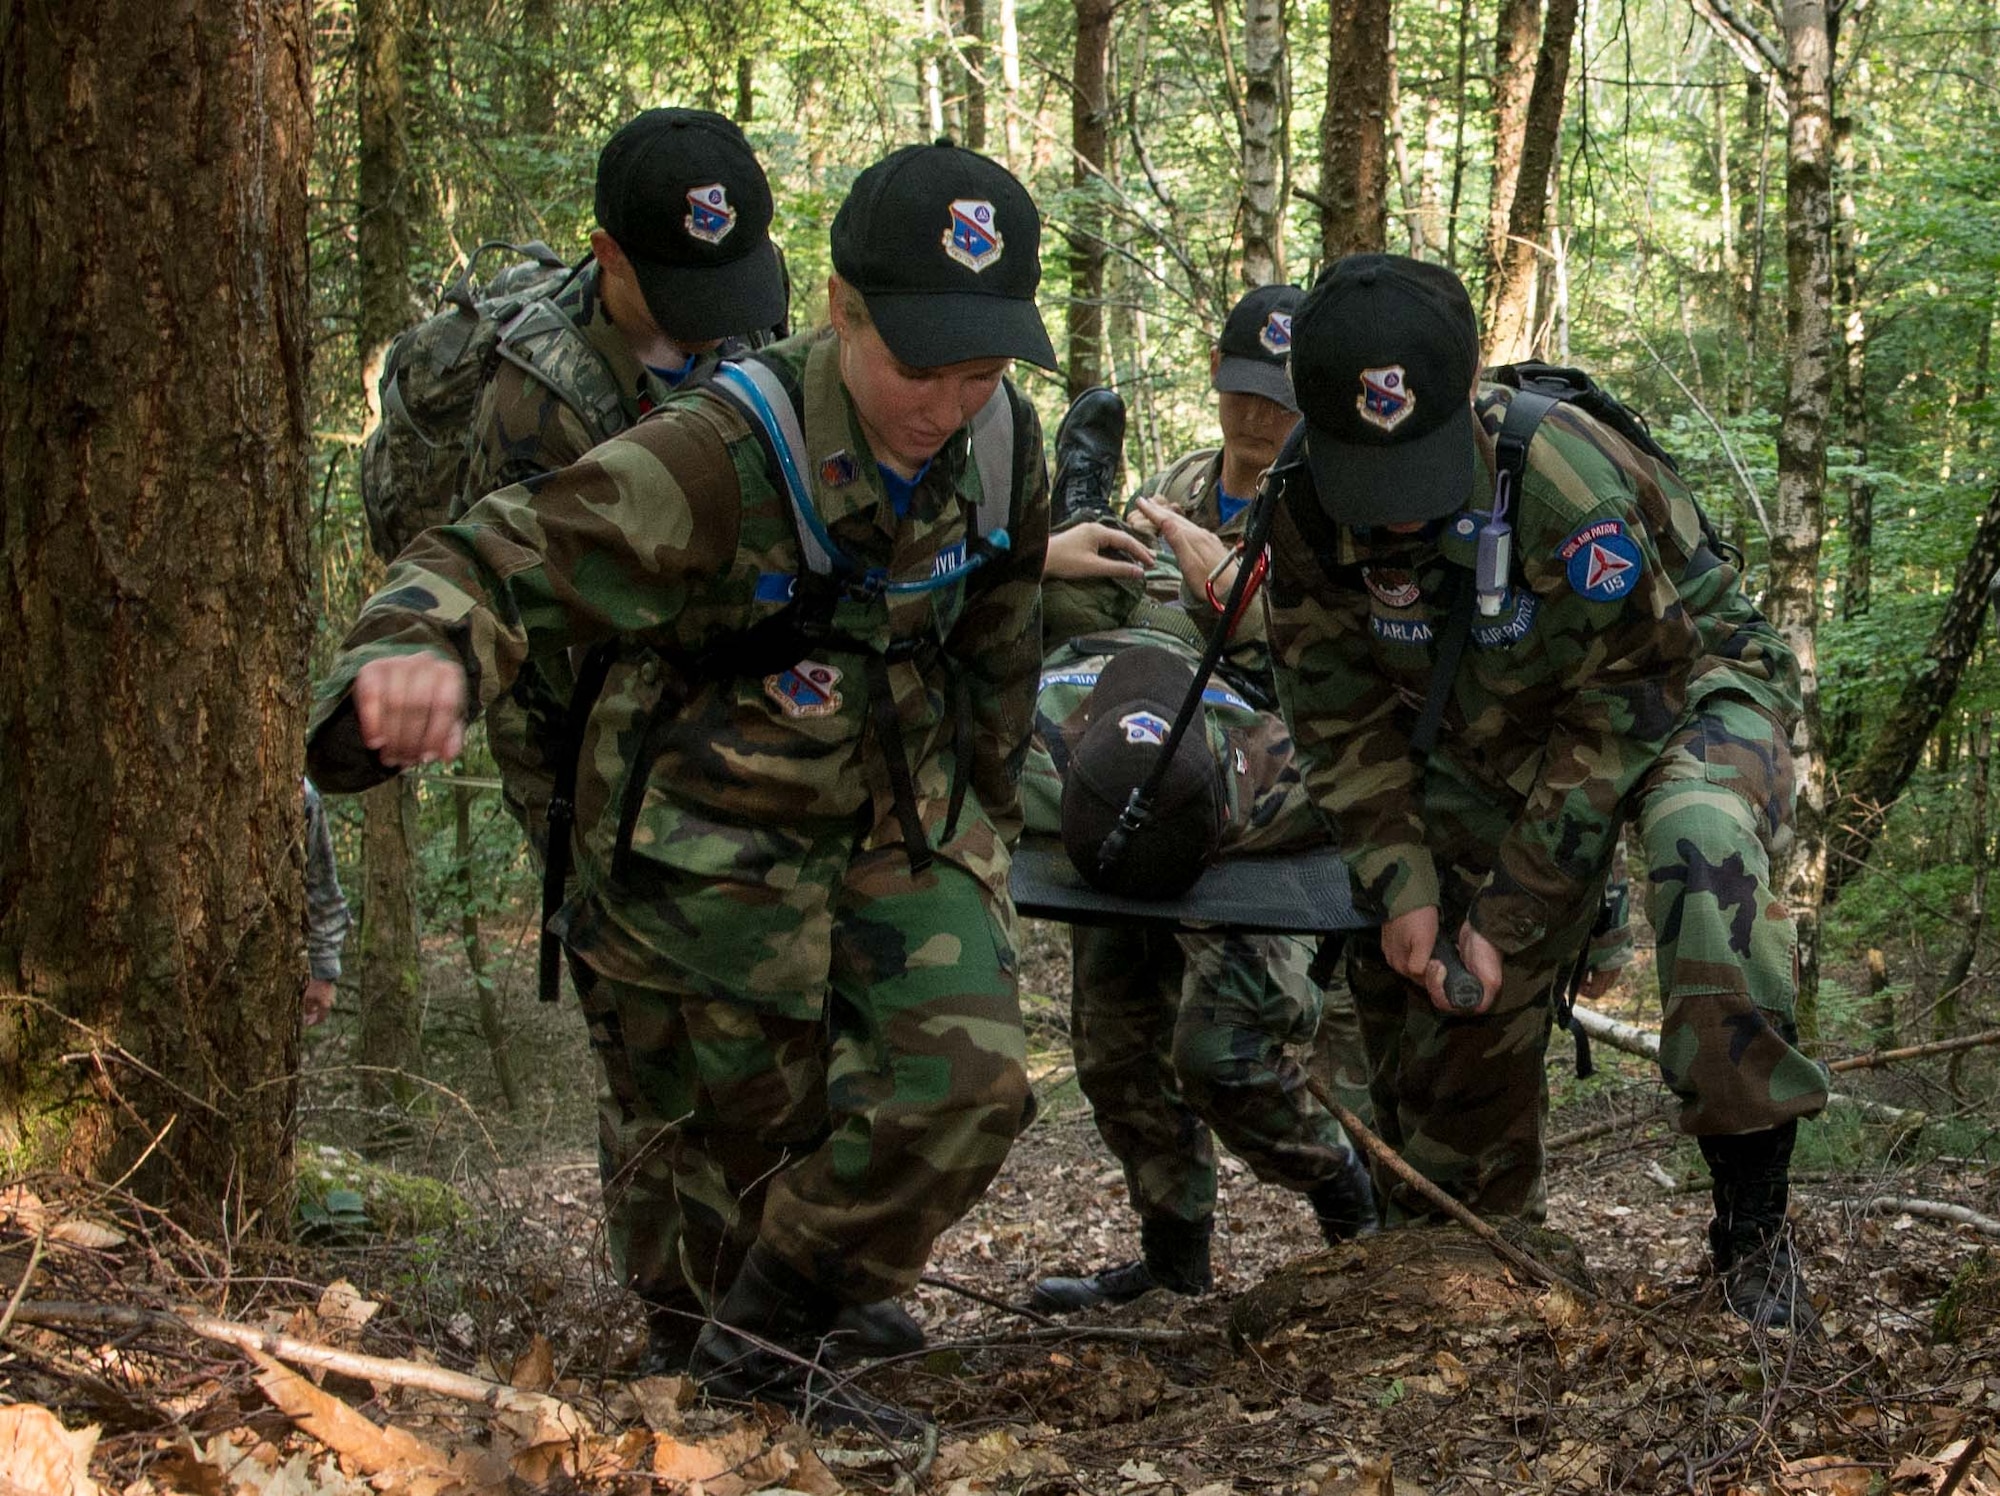 Cadets with the Civil Air Patrol European Encampment carry a stretcher bearing a fellow cadet through a woodland obstacle course on Ramstein Air Base, Germany, June 21, 2017. The cadets spent more than a week living in deployment tents on Ramstein, carrying out physical and mental tasks in a manner somewhat similar to Air Force Basic Training. (U.S. Air Force photo by Senior Airman Elizabeth Baker)